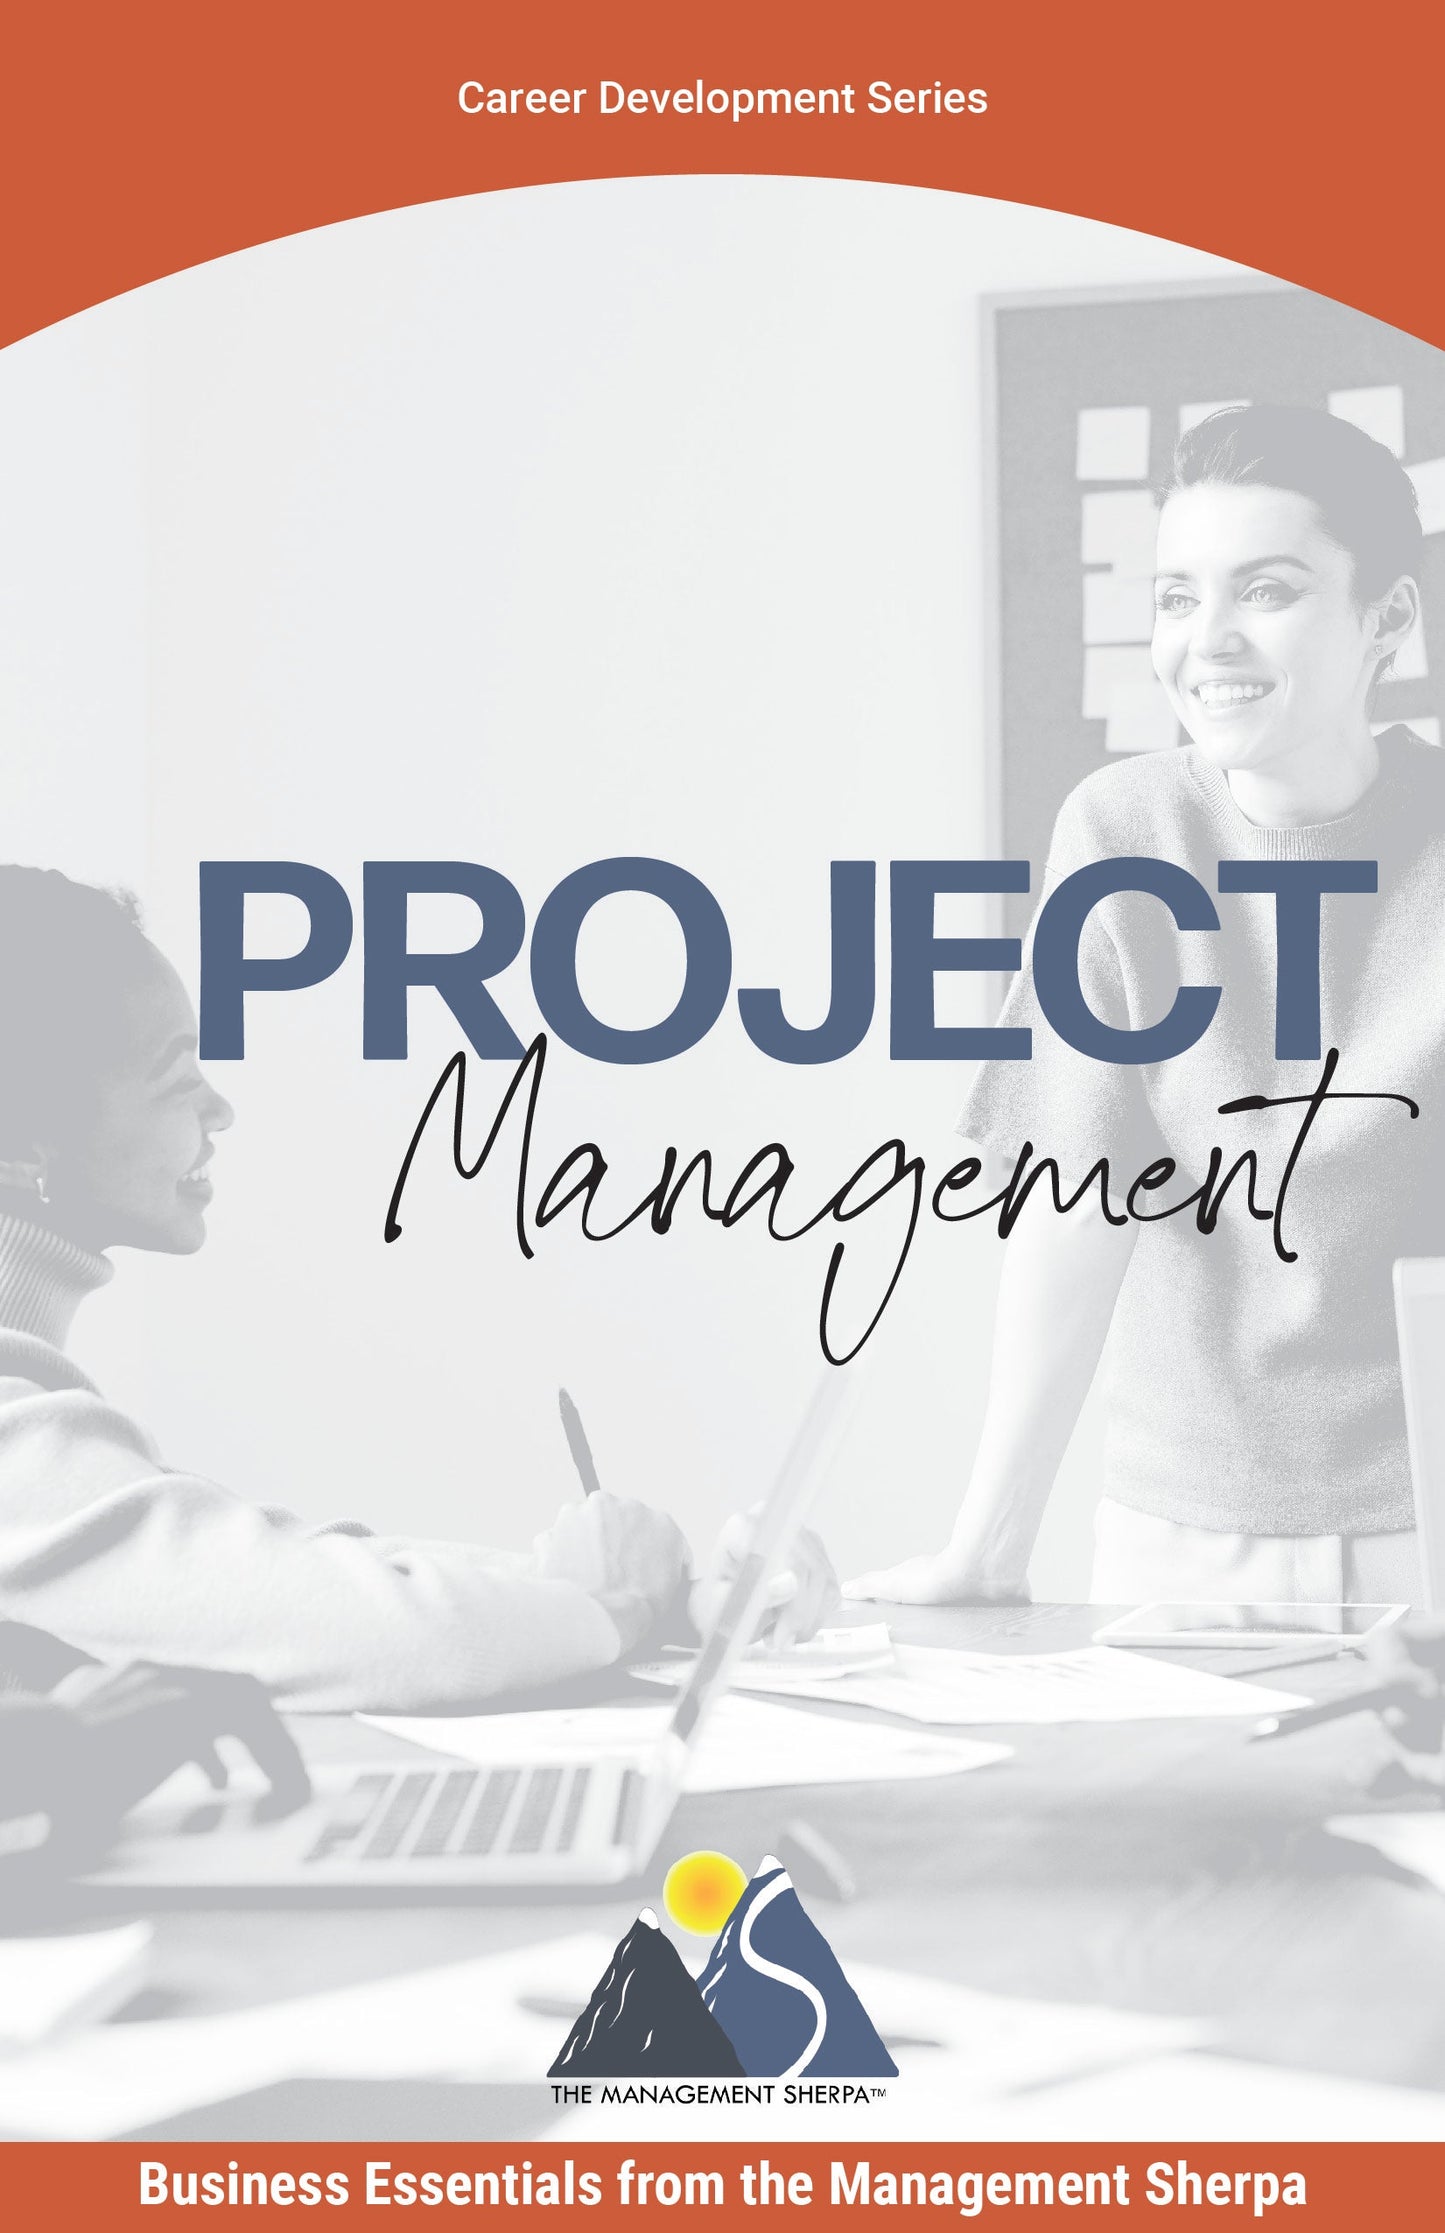 Project Management 7th Edition [Audiobook]